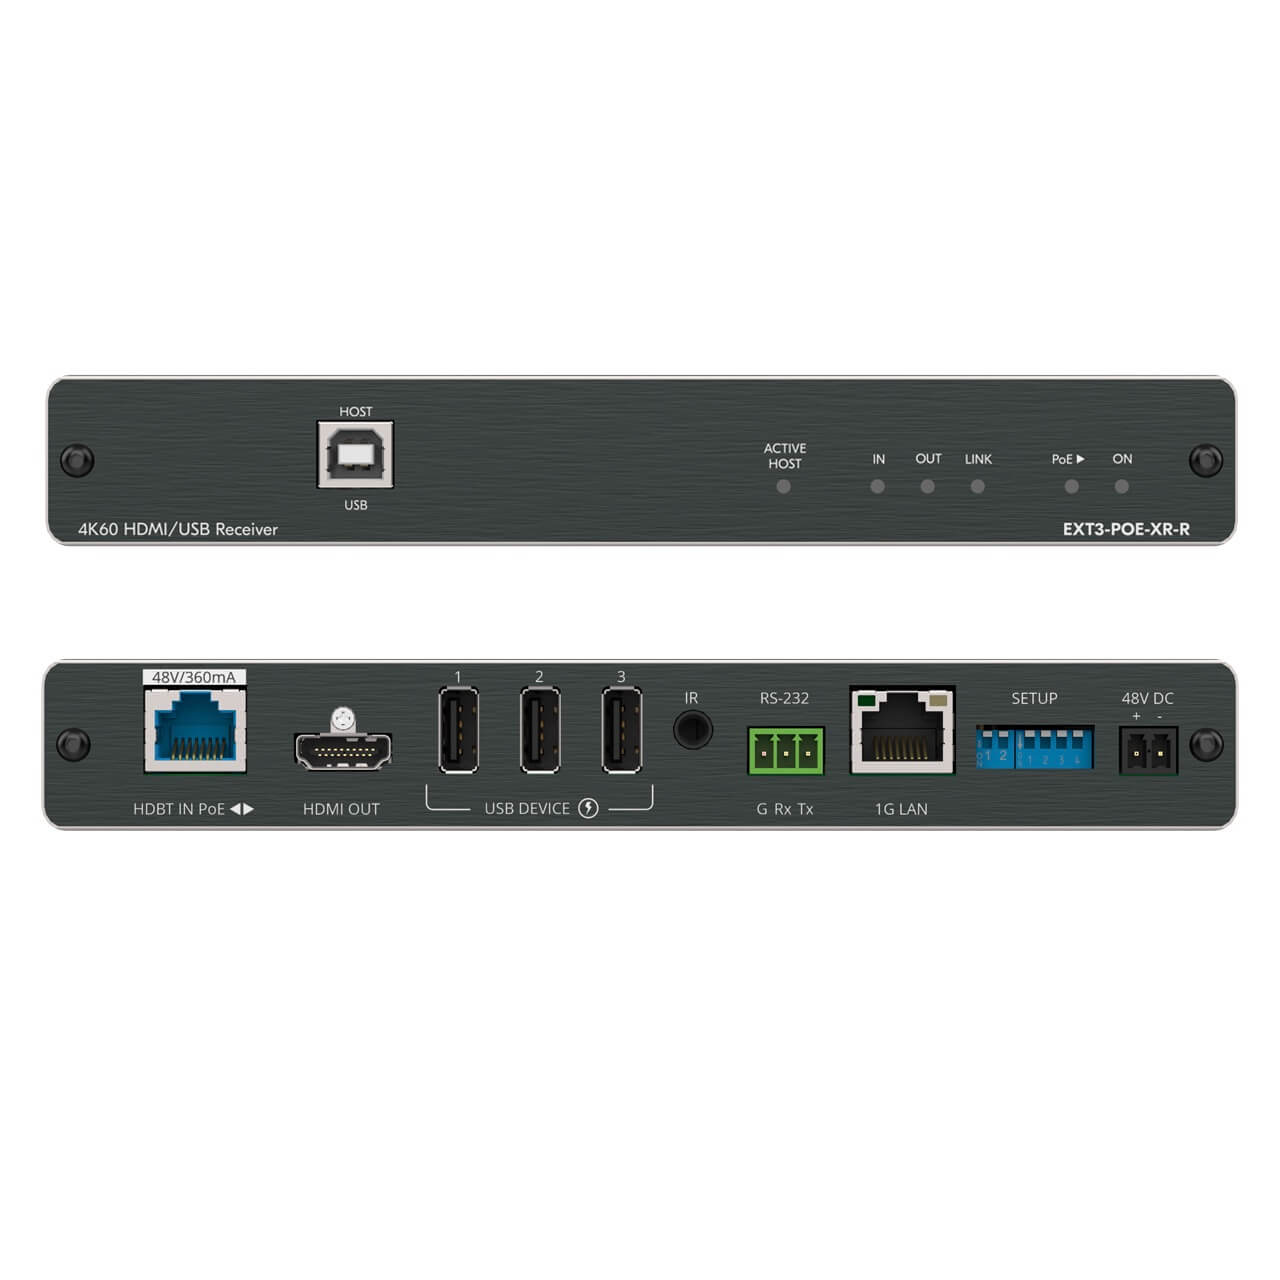 Kramer EXT3−POE−XR−R - 4K60 HDMI, USB 2, 1G Ethernet HDBaseT Receiver, front and rear combined views